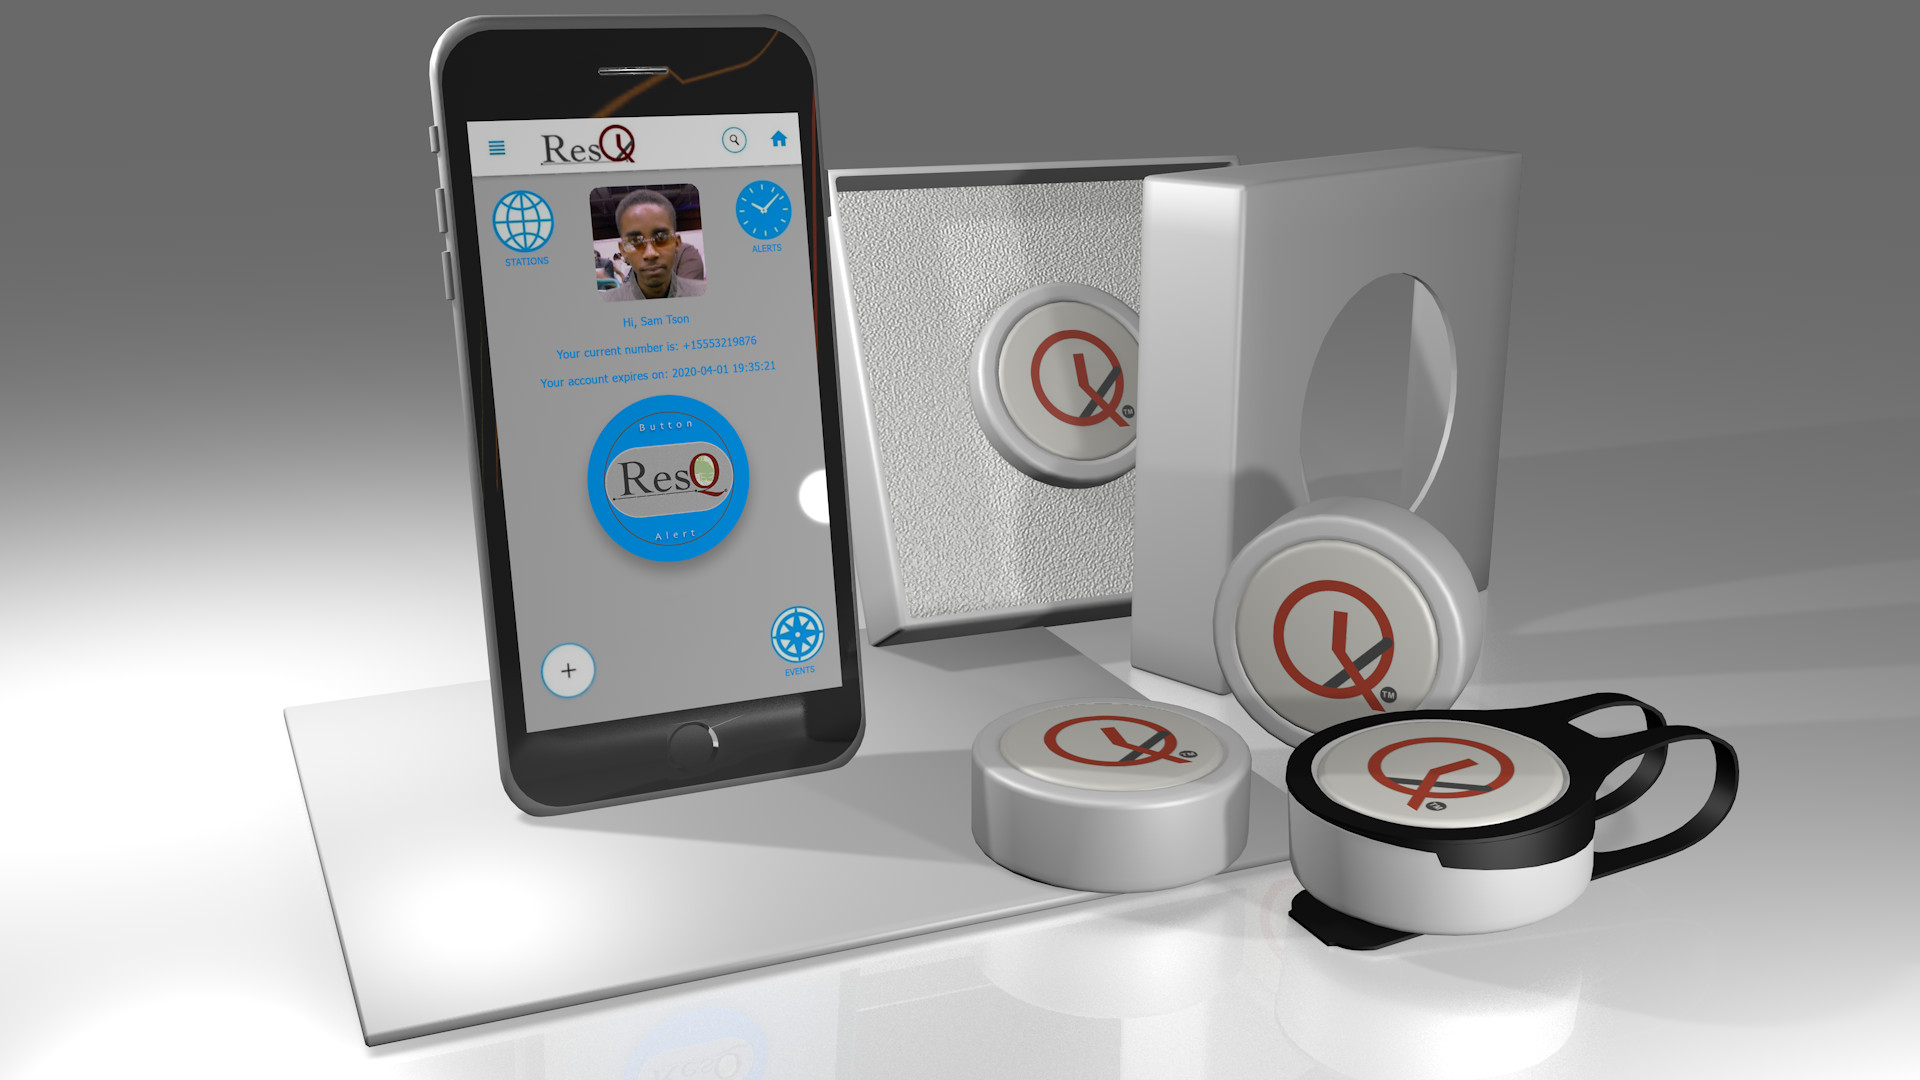 resq button 3D render with smart phone and box